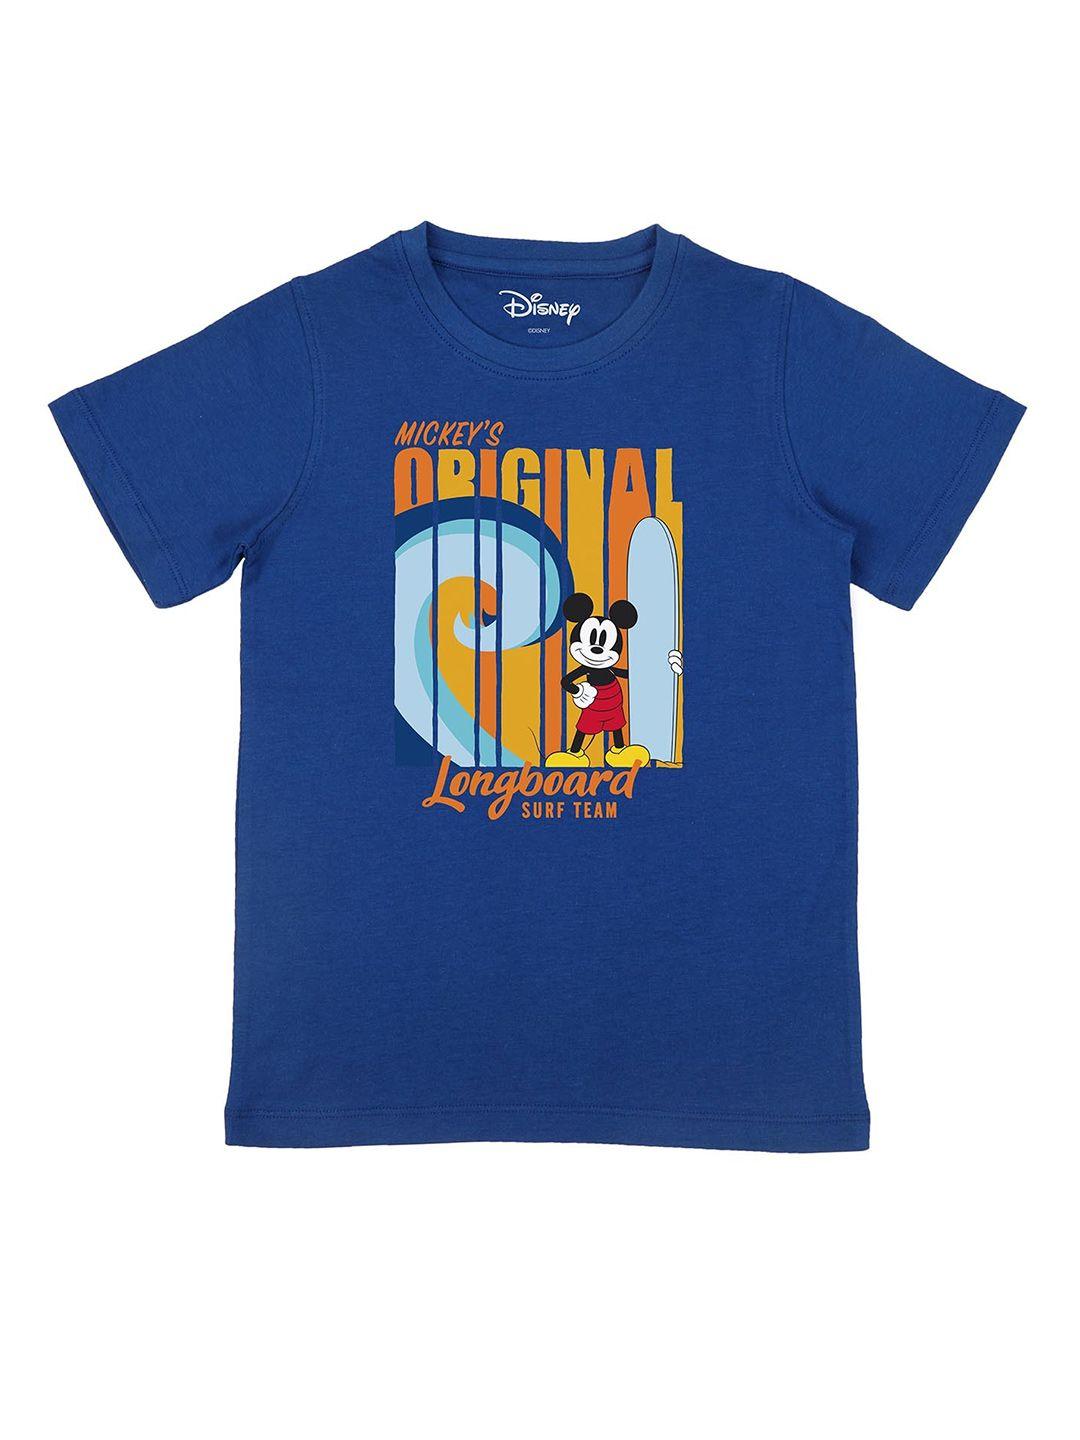 disney by wear your mind boys blue printed round neck cotton t-shirt